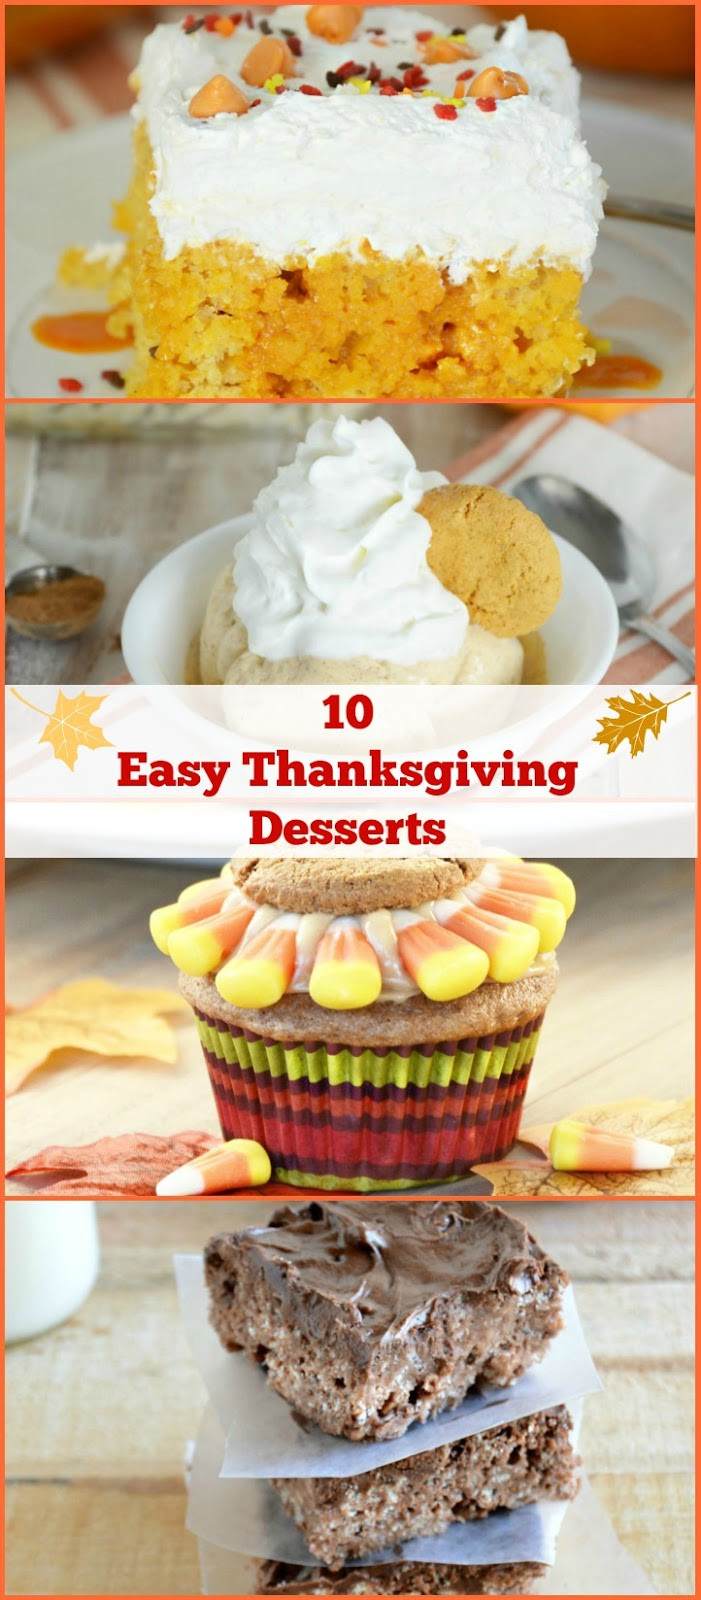 Thanksgiving Desserts Easy
 10 Easy Thanksgiving Dessert Ideas Meatloaf and Melodrama